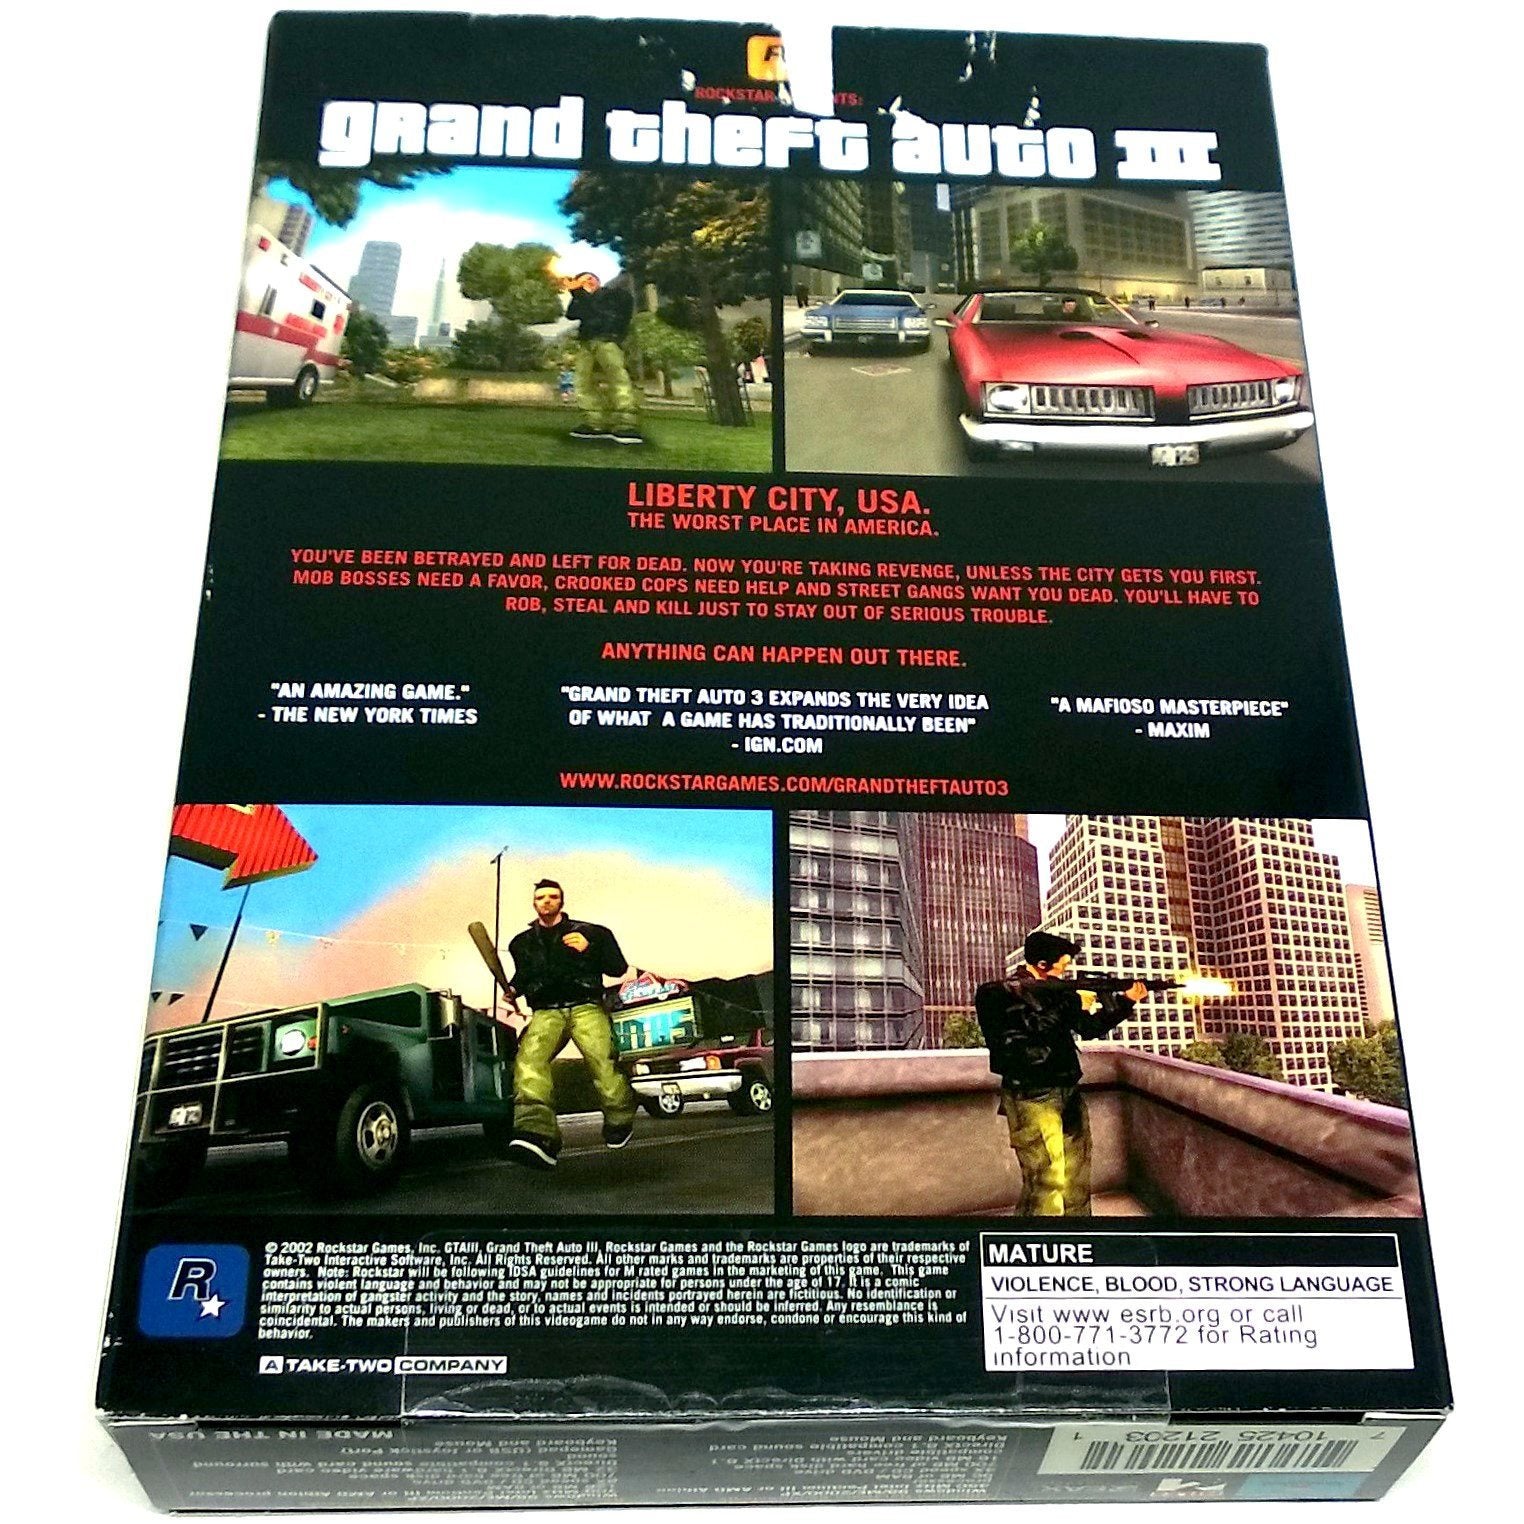 Grand Theft Auto III for PC CD-ROM - Back of box